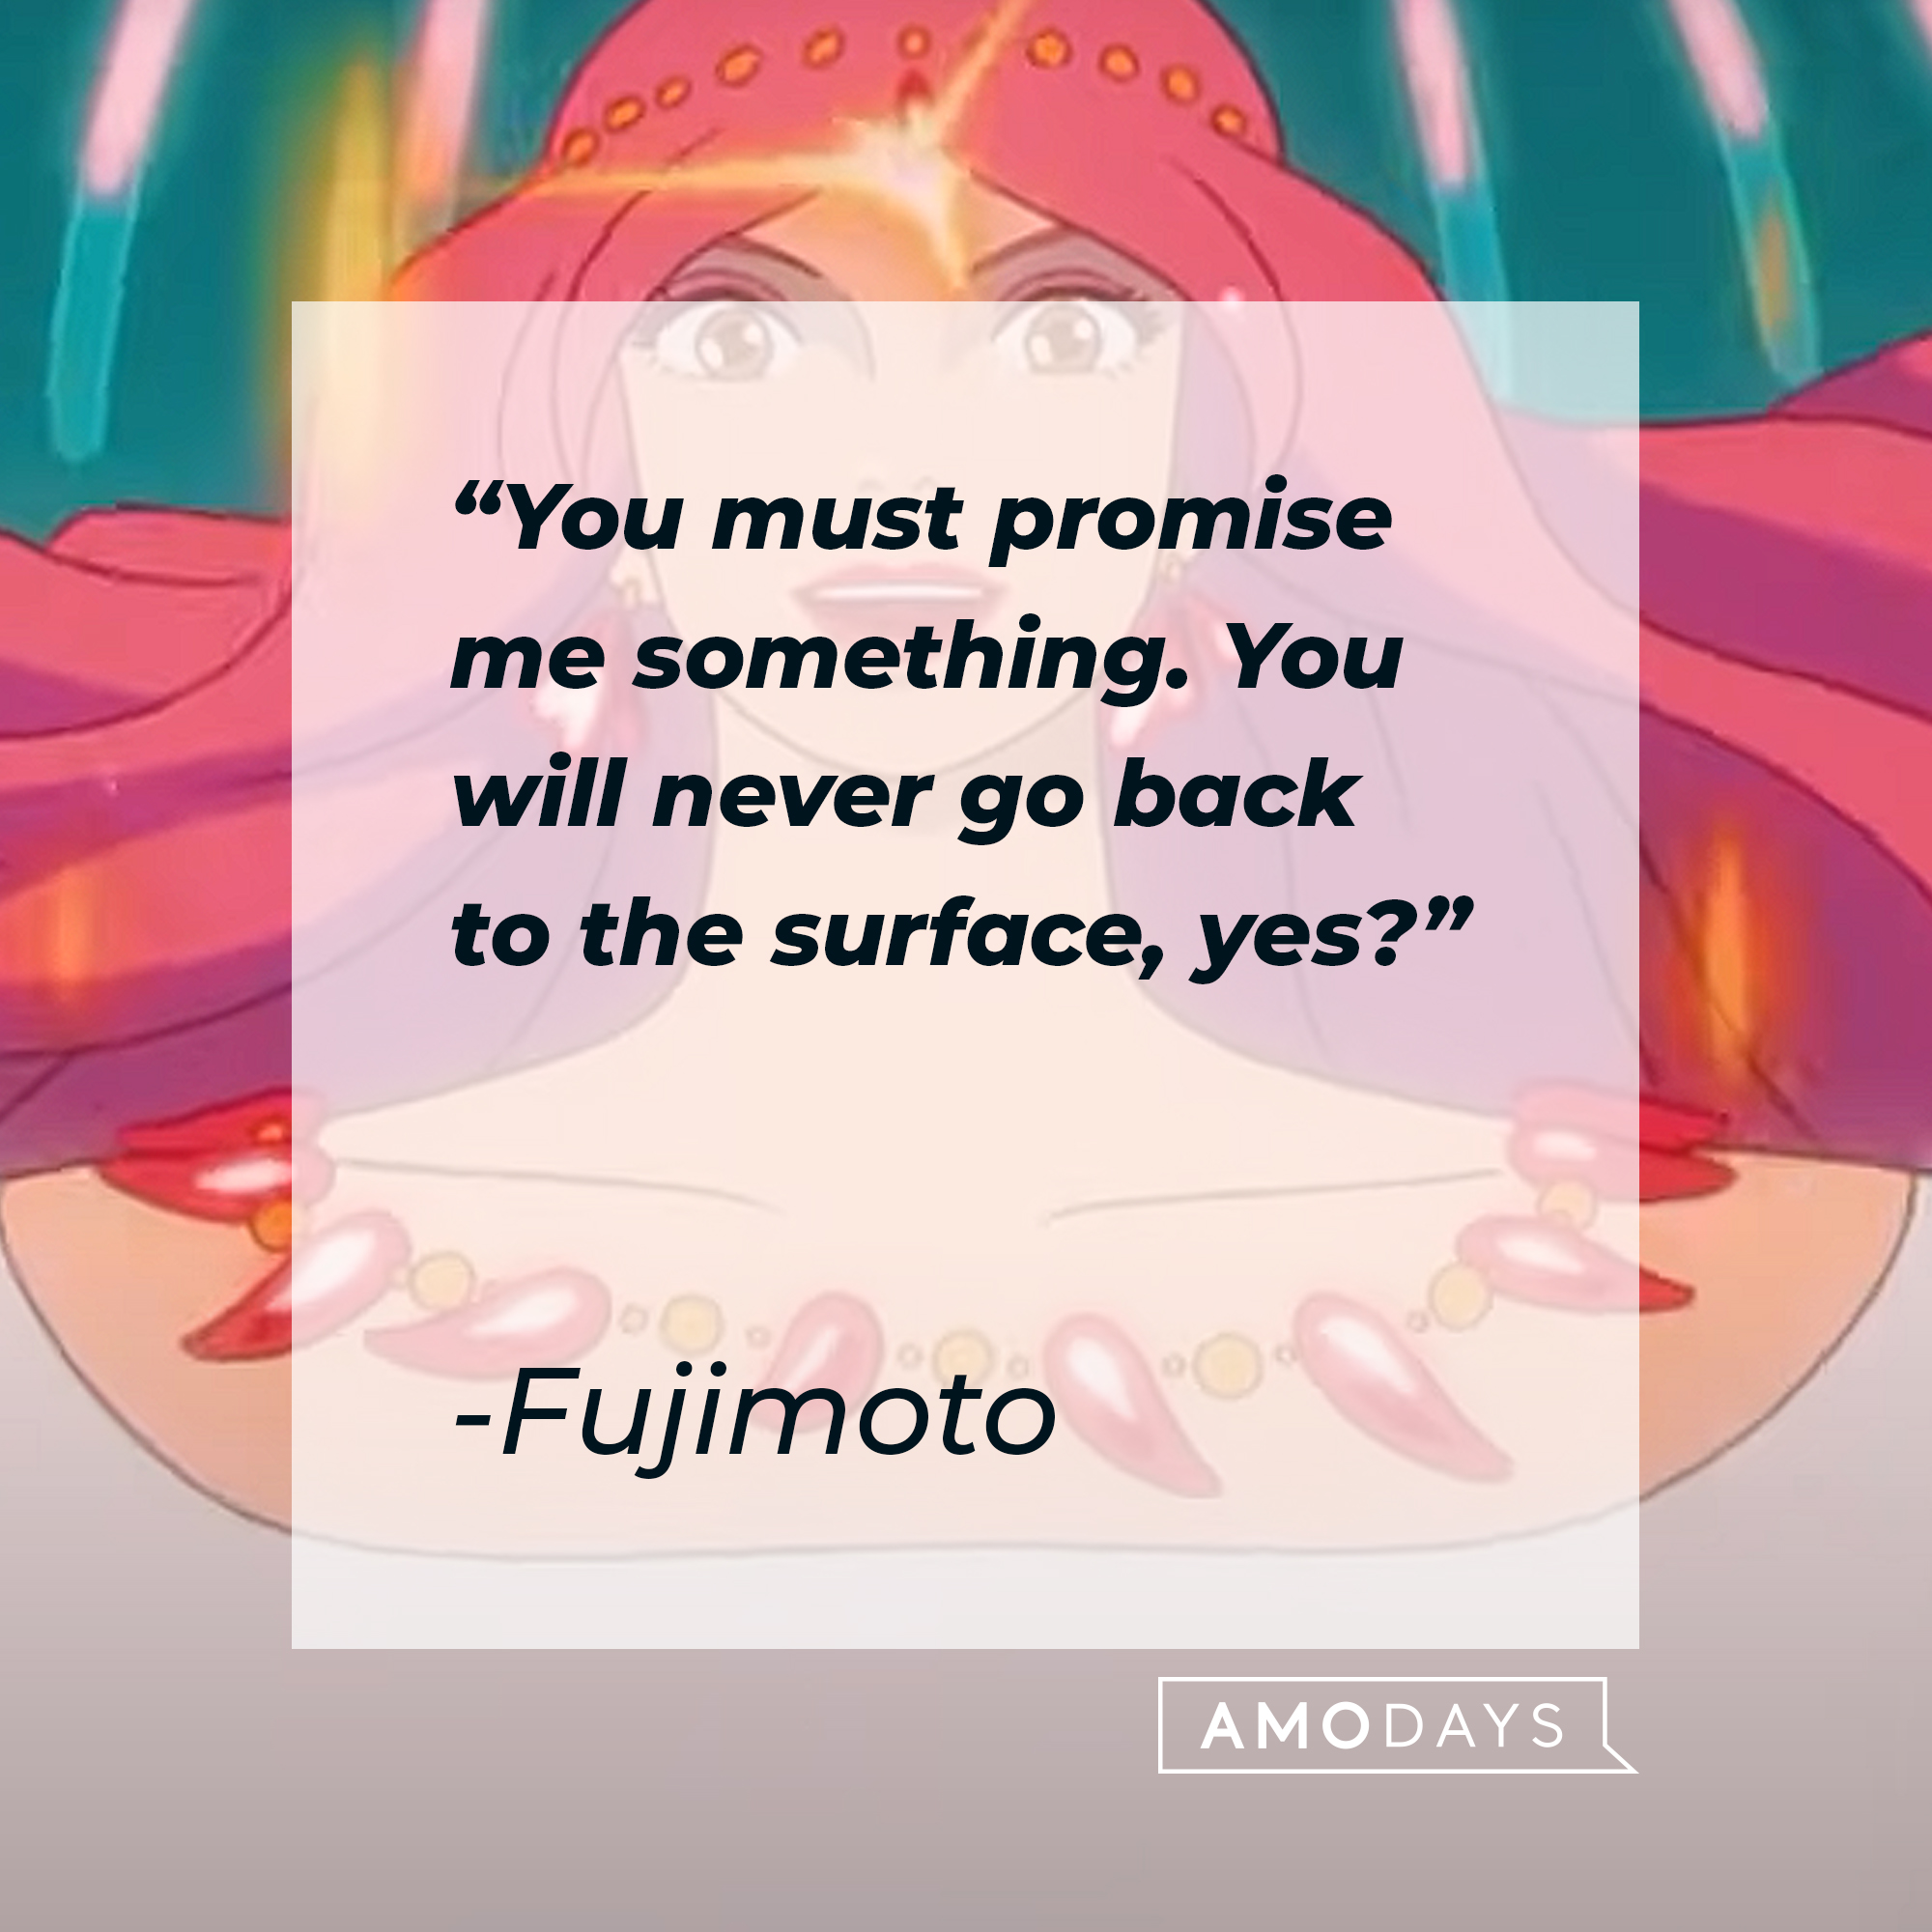 Fujimoto's quote: "You must promise me something. You will never go back to the surface, yes?" | Source: Youtube.com/crunchyrollstoreau